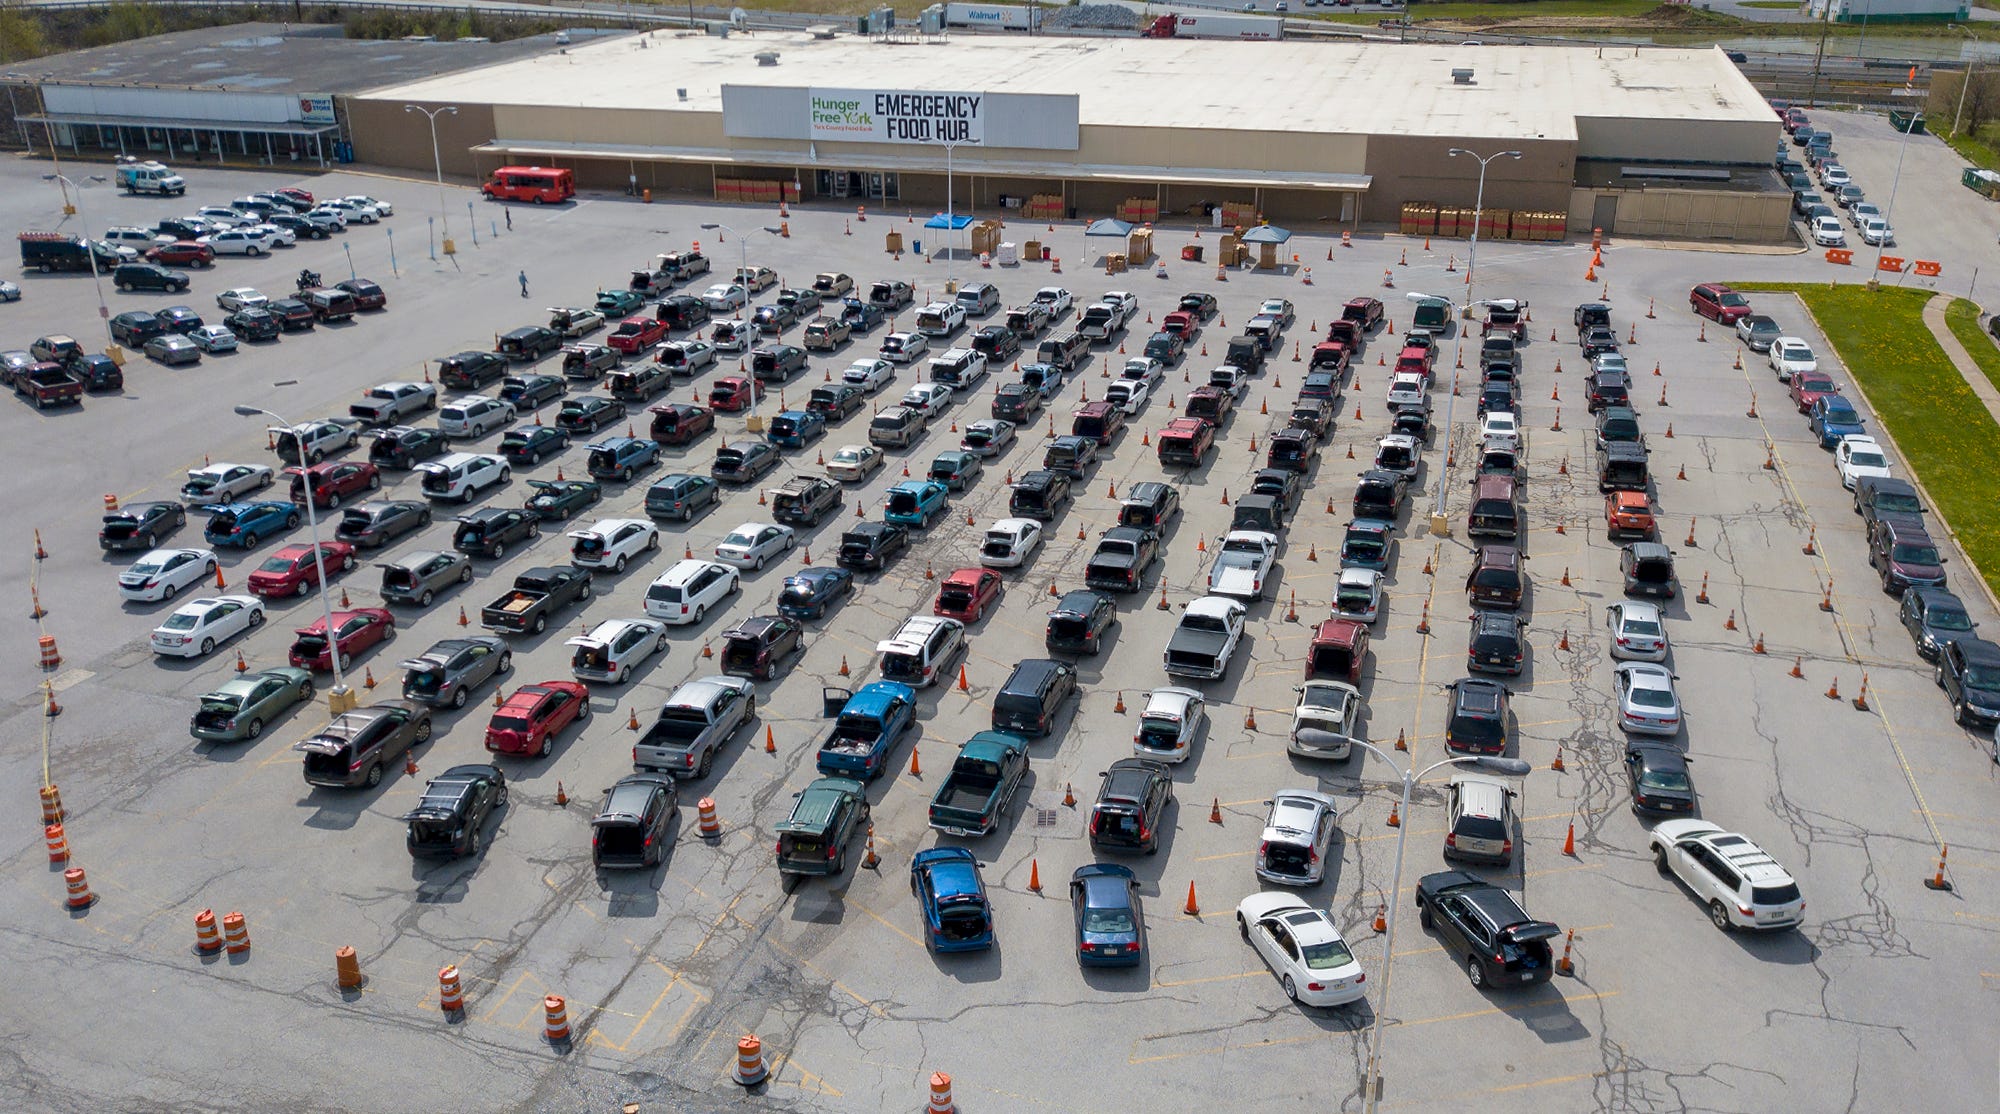 Hundreds of vehicles wait to pick up food during distribution at the East York Food Hub,  Tuesday, April 14, 2020. Hundreds of other vehicles waiting for the distribution were guided through a nearby neighborhood by fire police and Springettsbury Township Police to keep traffic flowing.
John A. Pavoncello photo